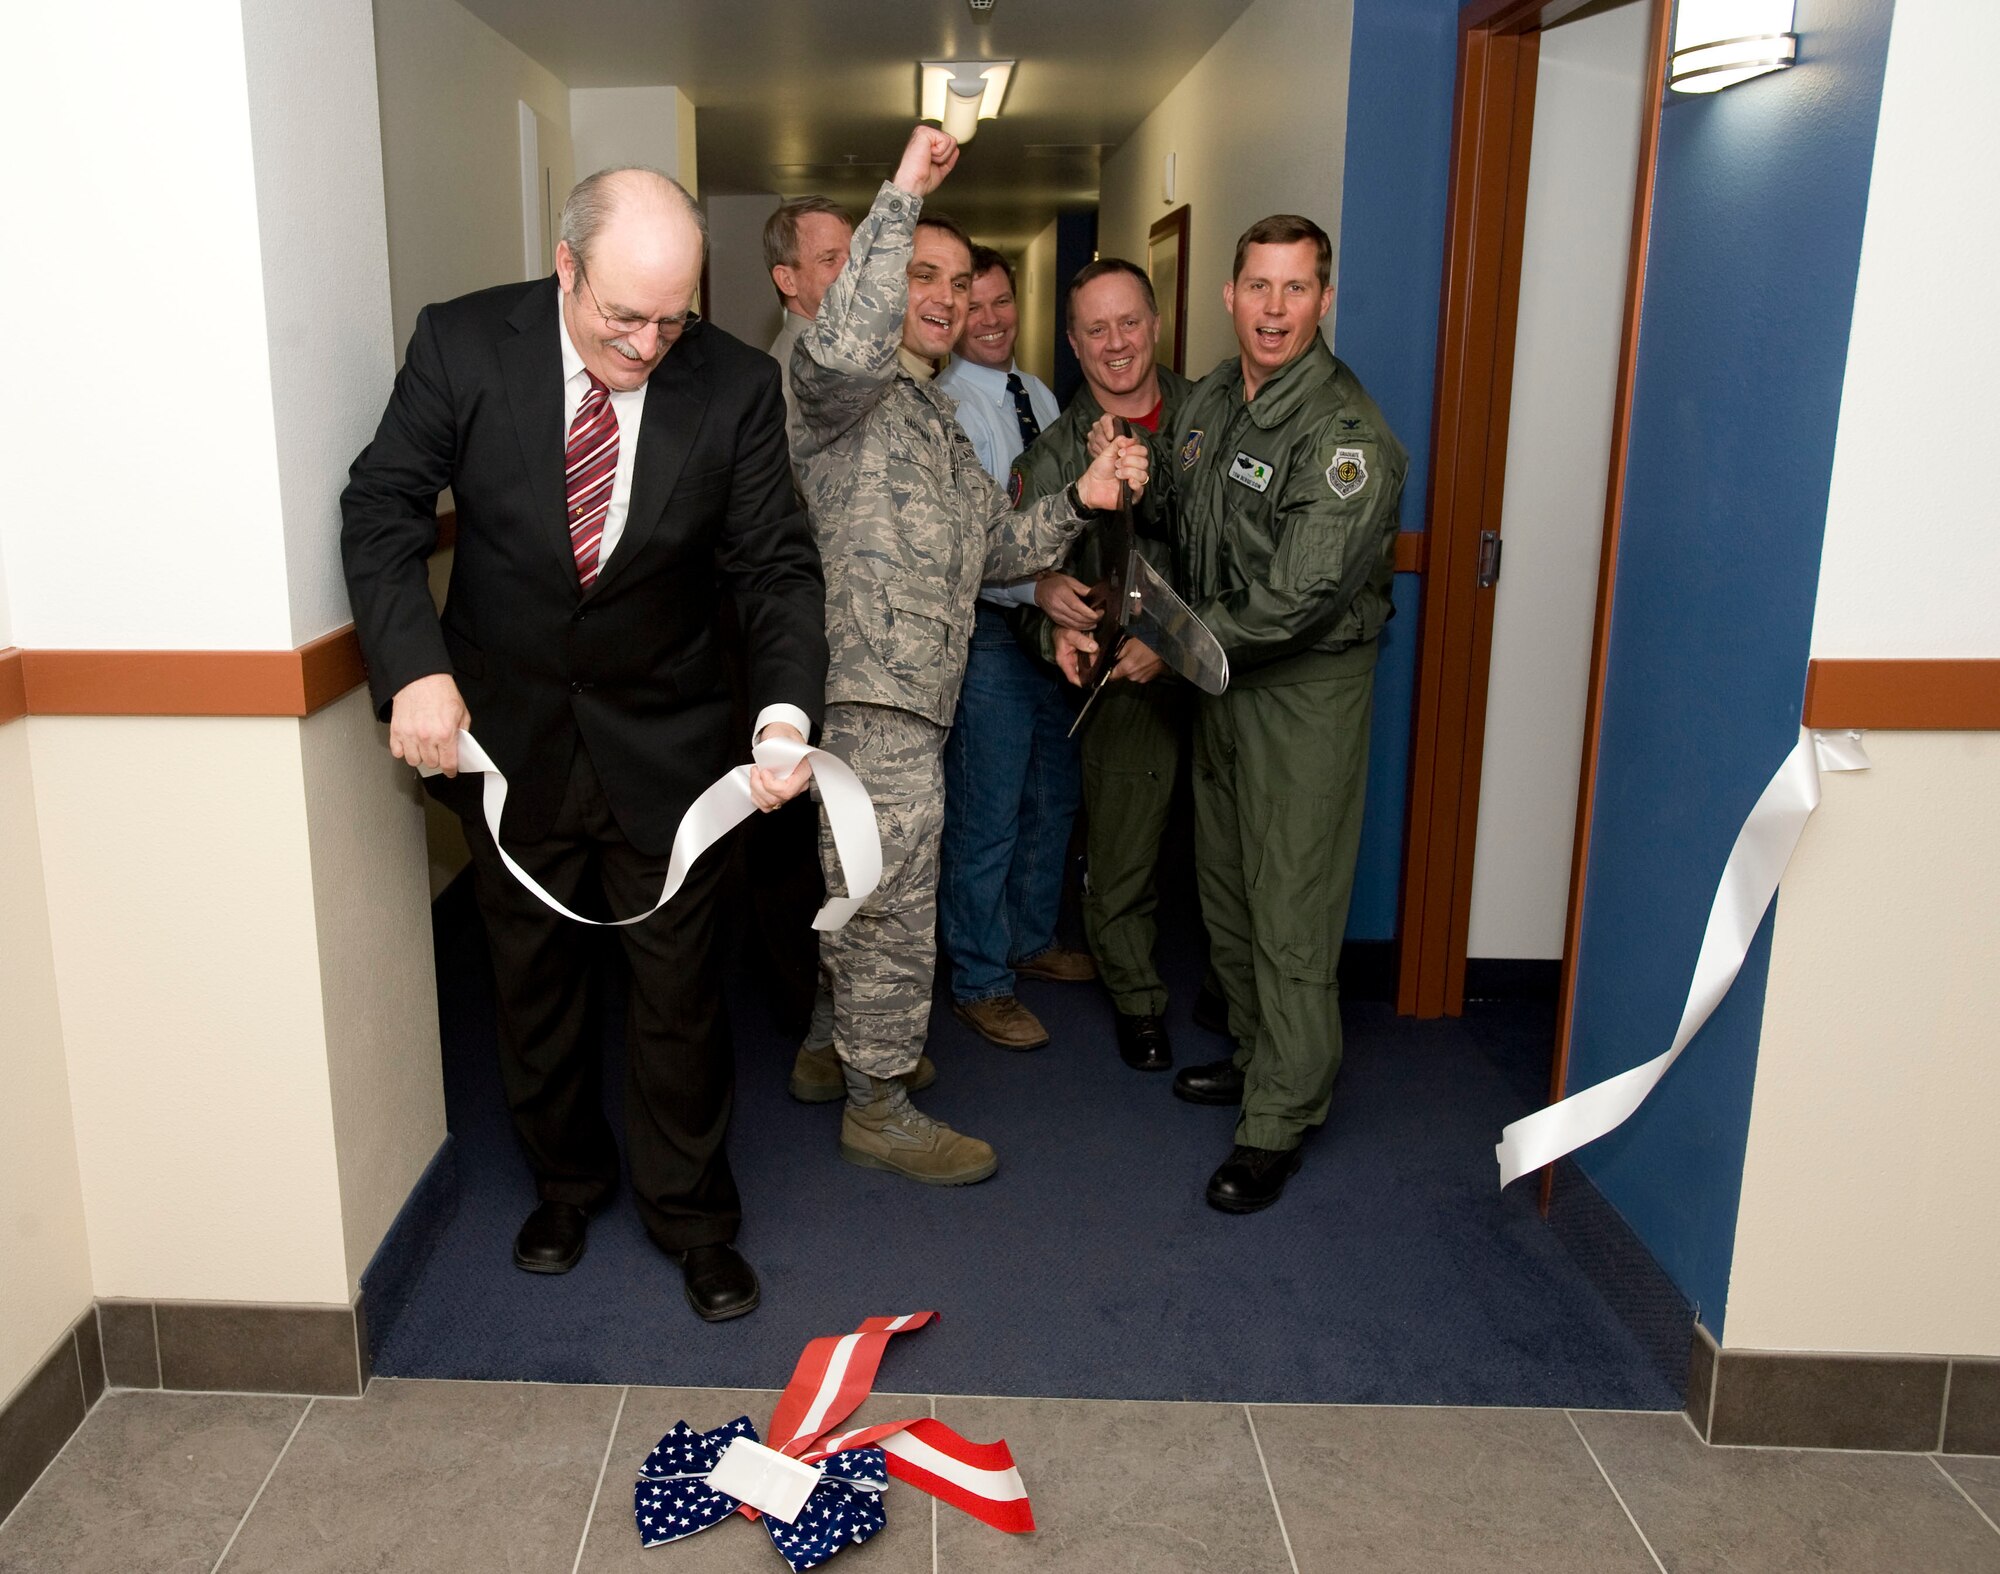 ELMENDORF AIR FORCE BASE, Alaska -- Senior Elmendorf officials, the North Star Inn manager and a CH2M Hill representative cut the ribbon for grand opening of Denali Hall April 3, 2009. The renovated Denali Hall provides 119 additional suites to North Star Inn's available billeting rooms. The renovations took 18 months to complete and cost $22 million. Denali Hall was originally built in 1950s as 500-man dormitory. (U.S. Air Force photo by Senior Airman Jonathan Steffen) 